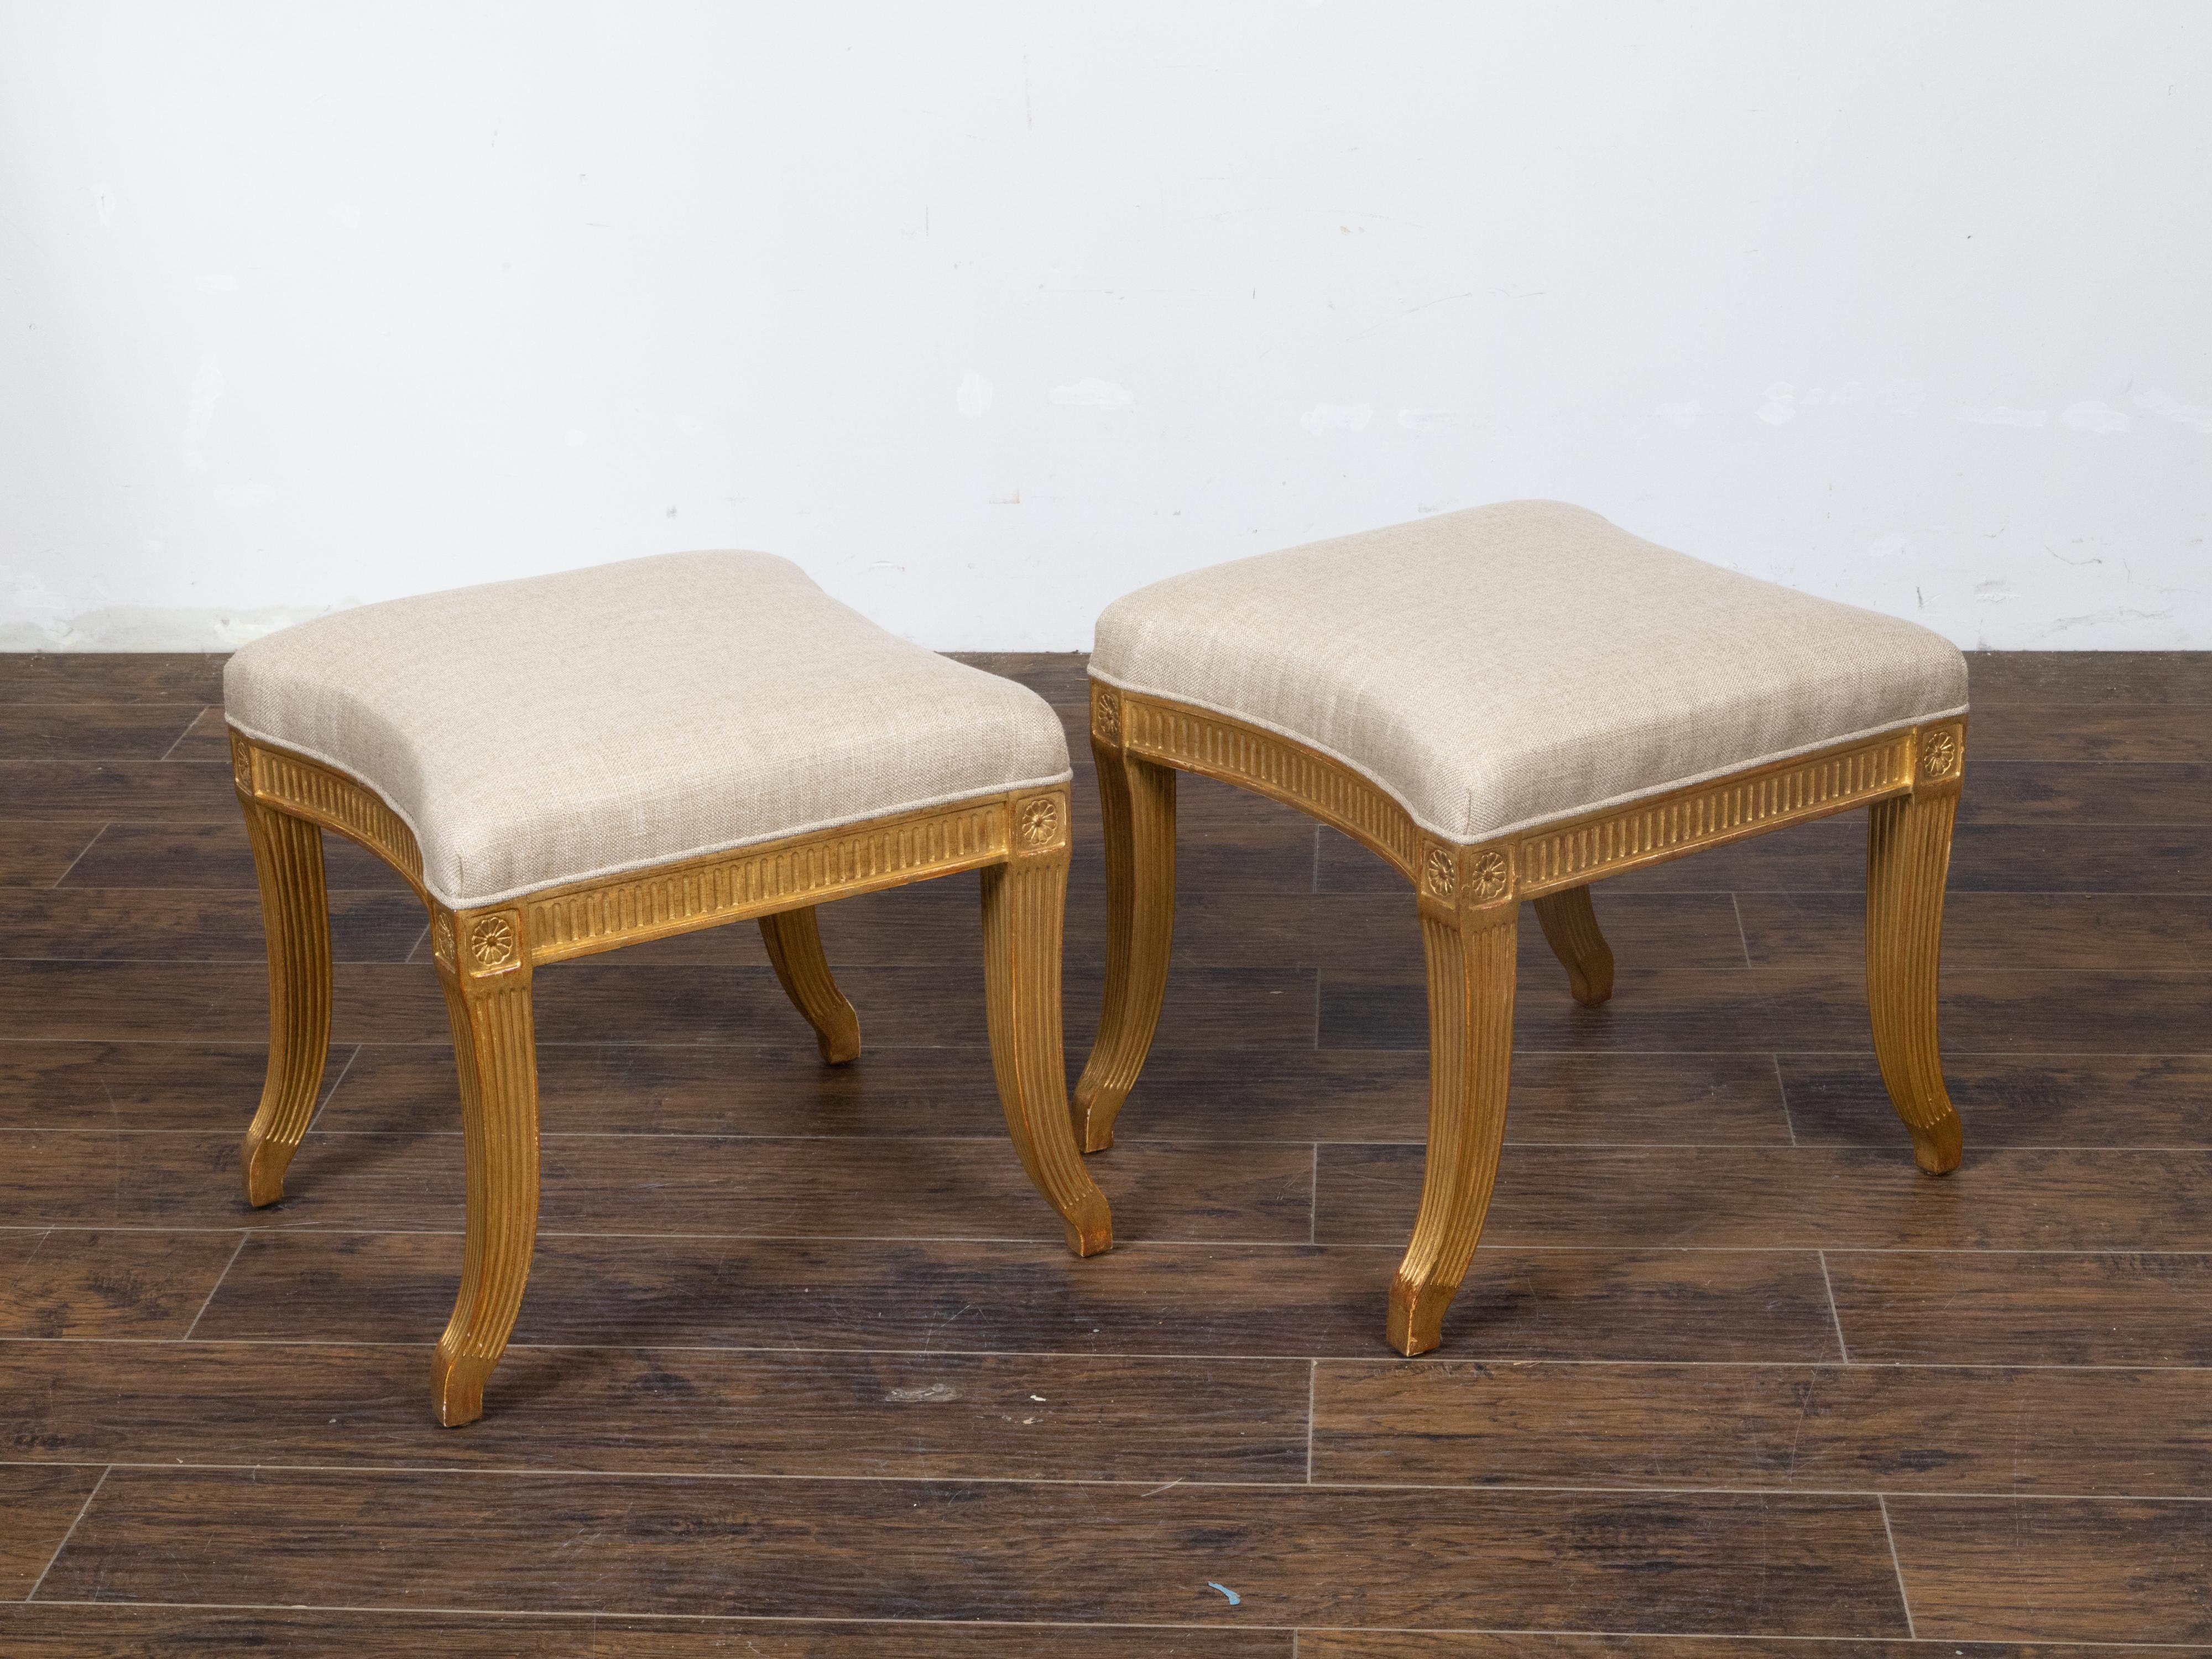 Pair of French Directoire Style Midcentury Giltwood Stools with New Upholstery For Sale 2